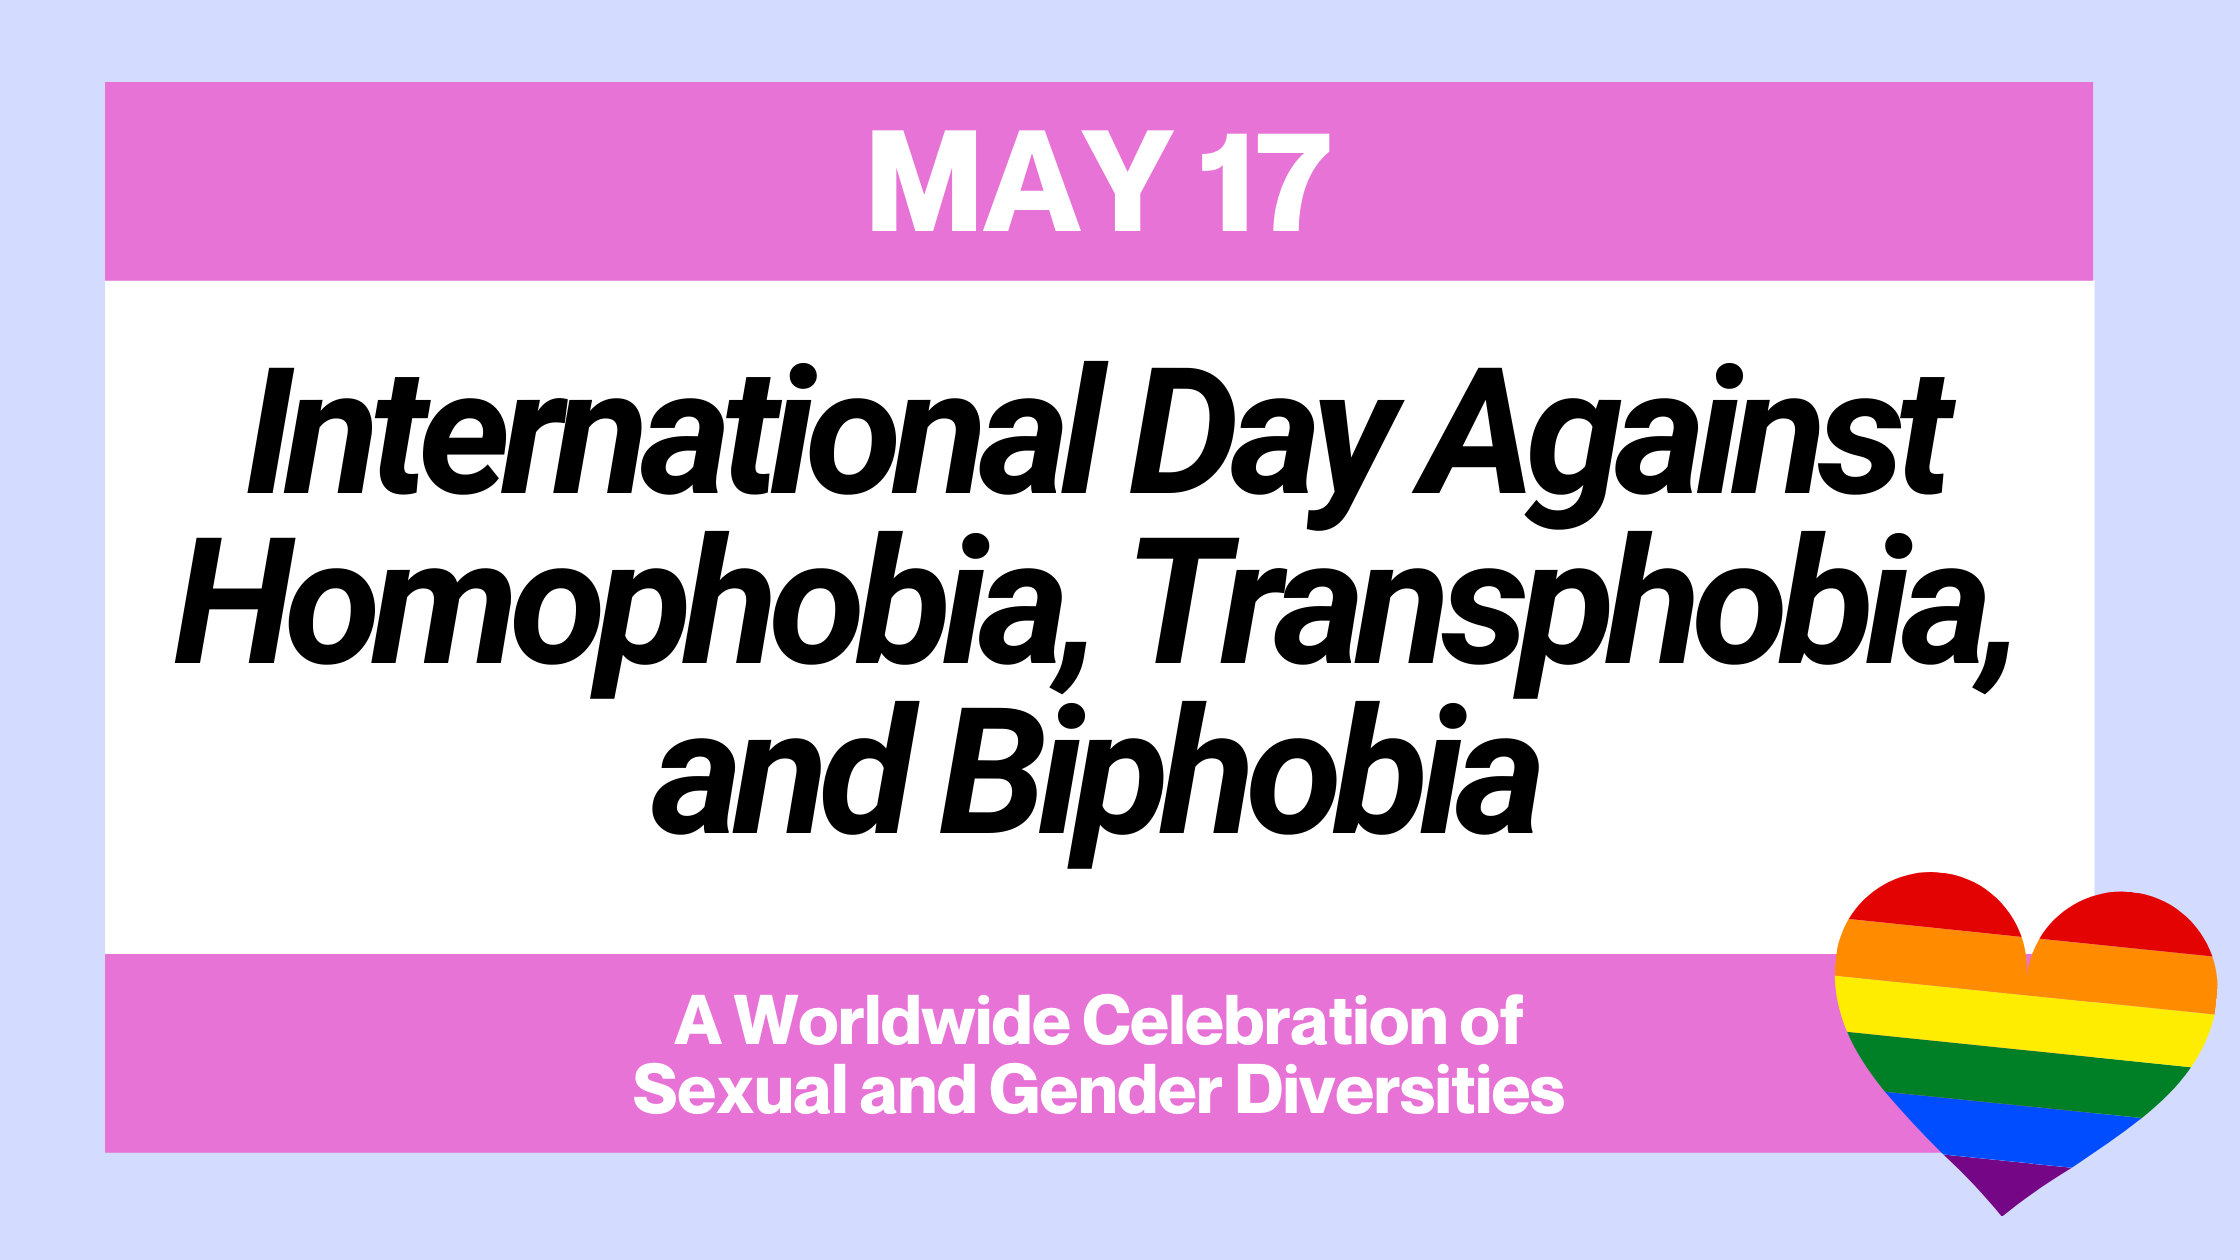 It's International Day Against Homophobia, Transphobia and Biphobia!